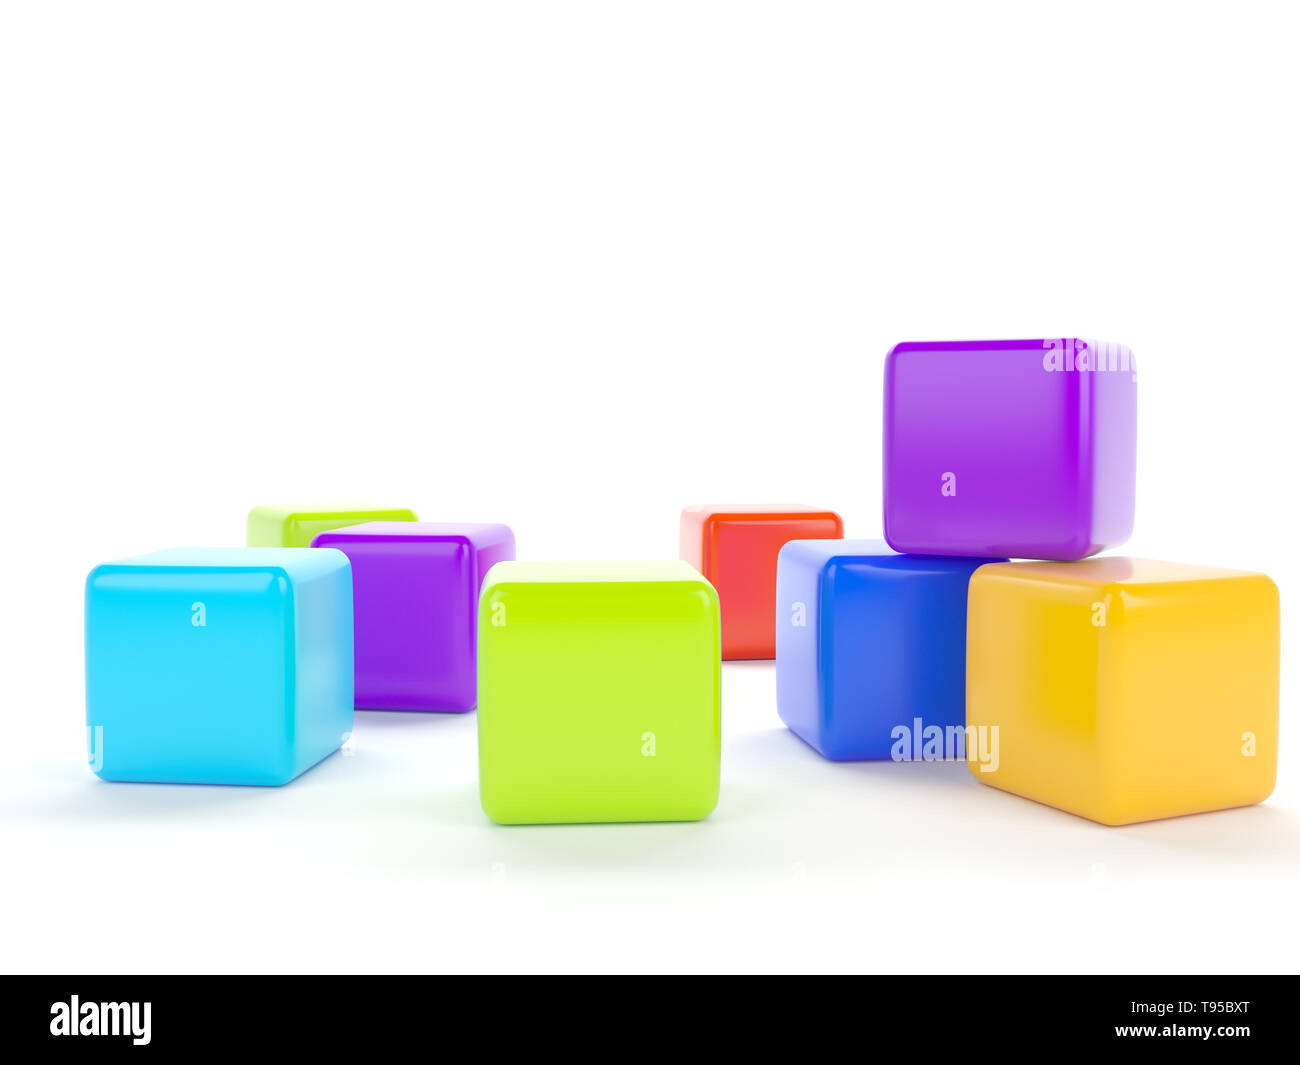 Colorful plastic cubes on a white background. Stock Photo